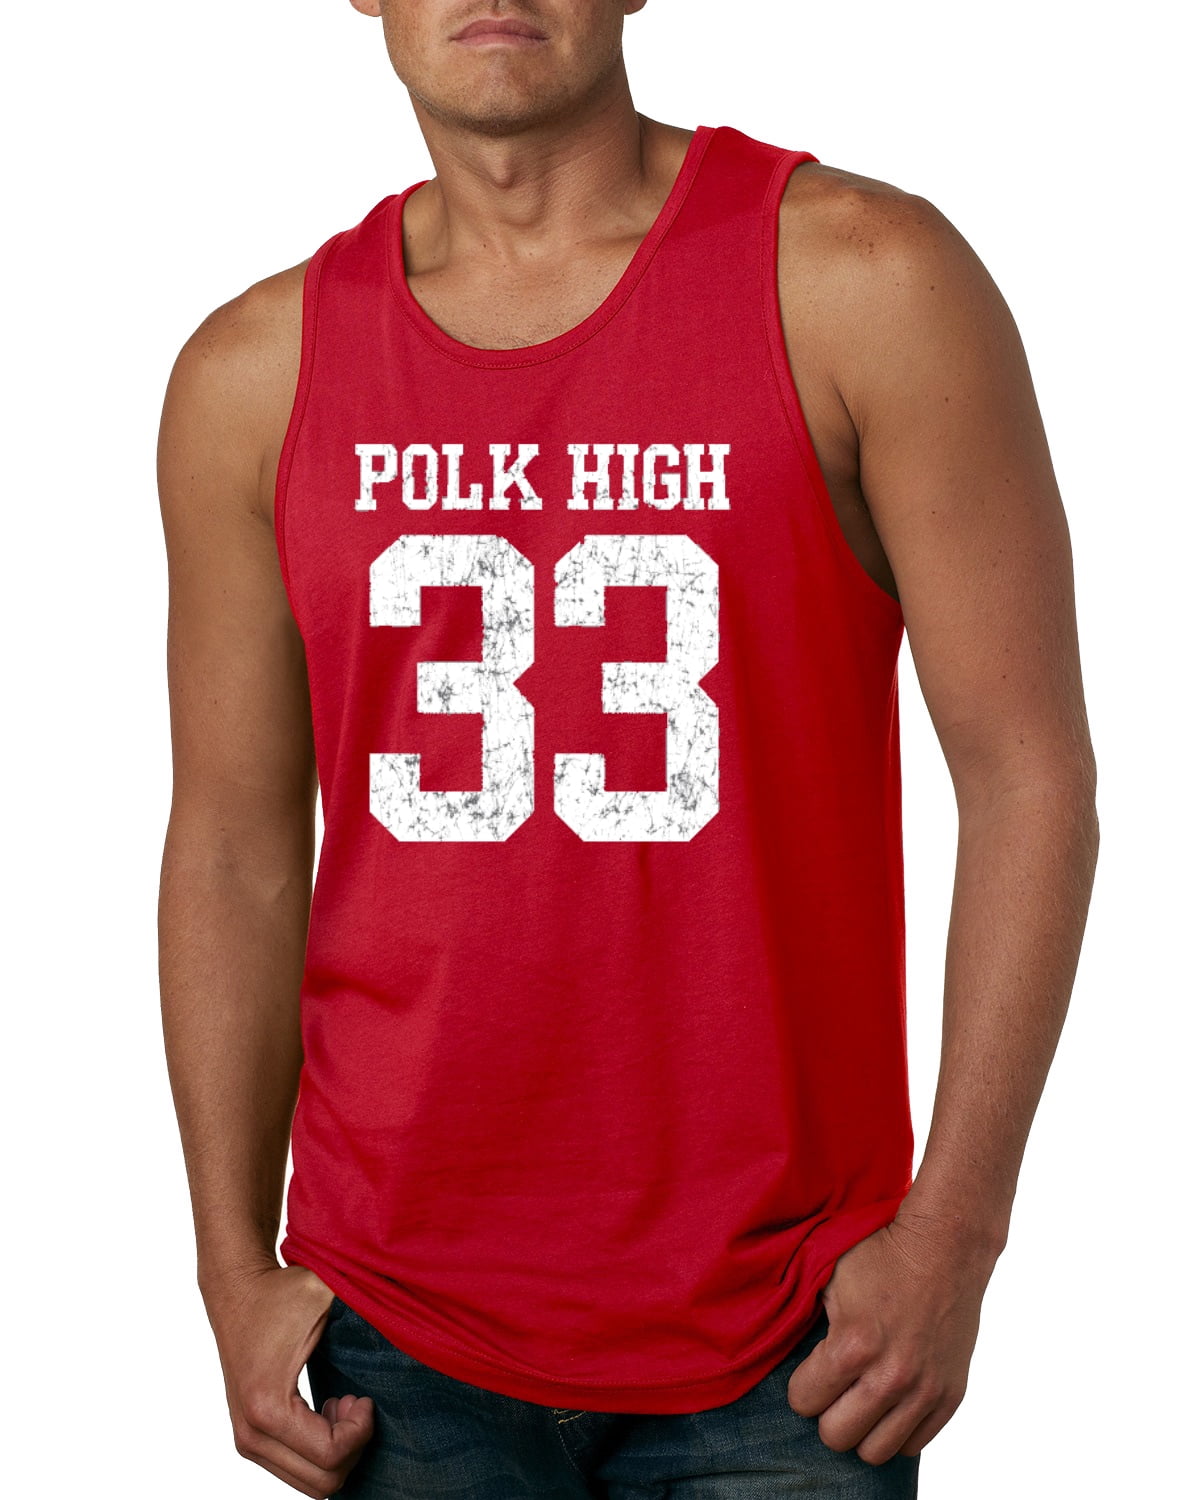 Mens Polk High Tank Top Married with Children 